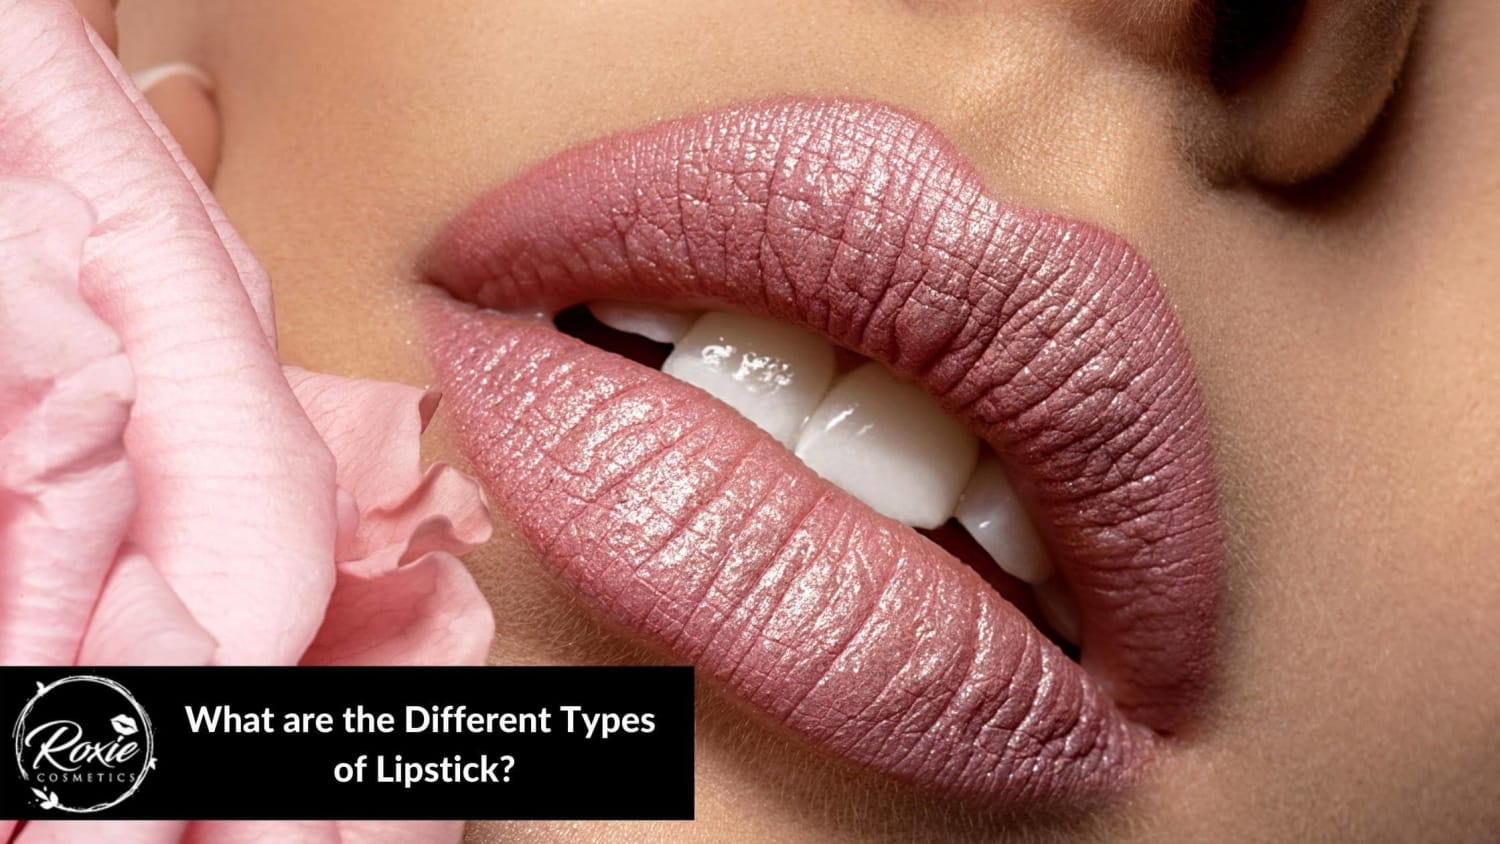 What are the Different Types of Lipstick?